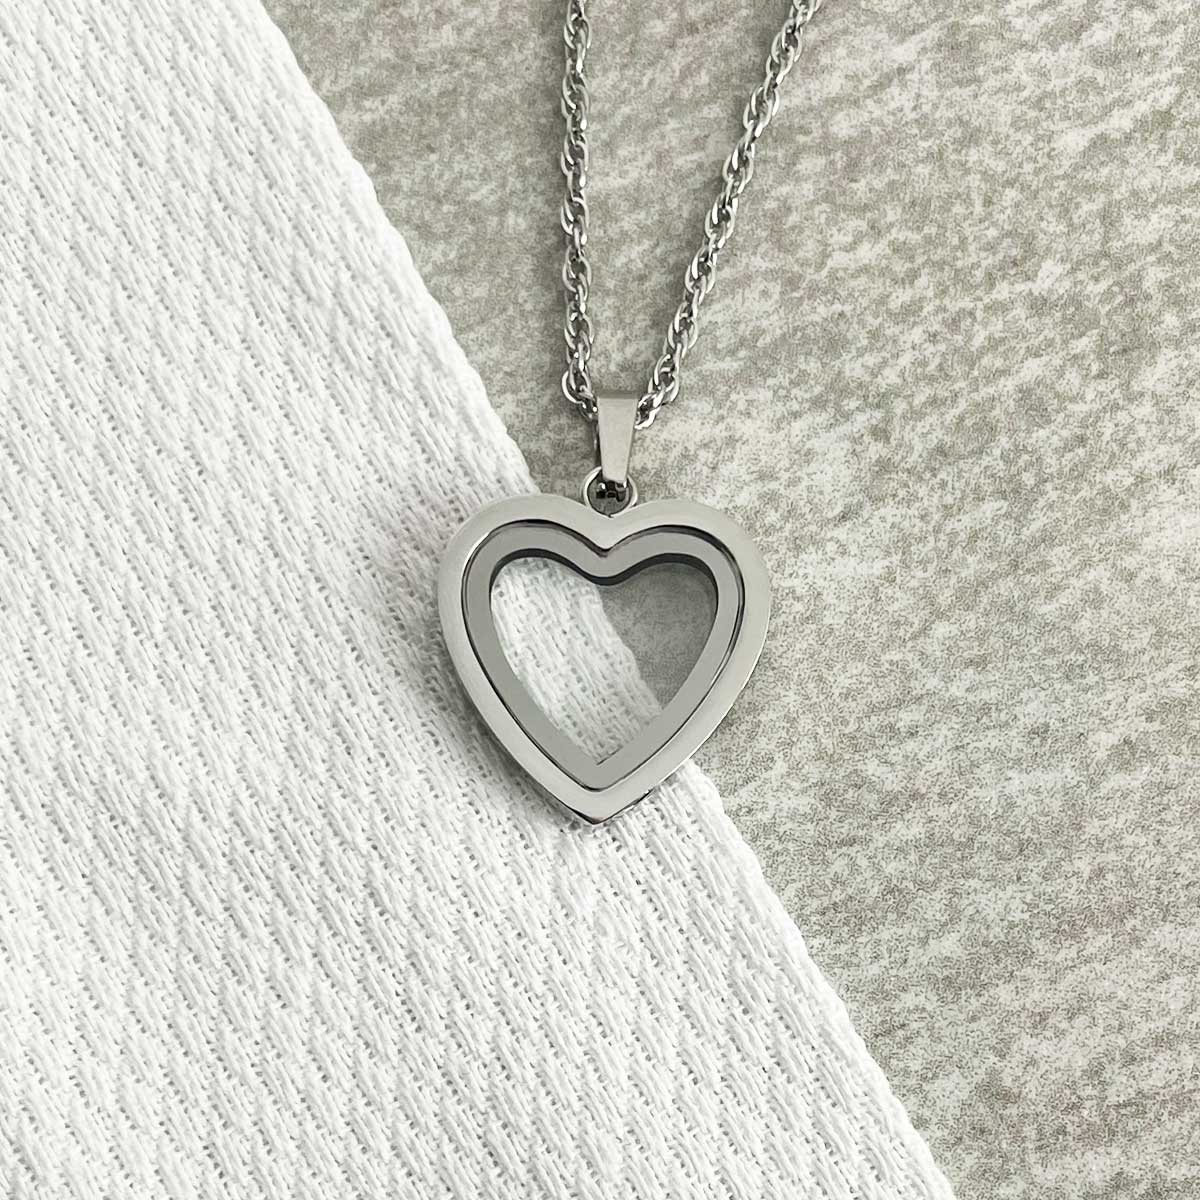 Heart Window Cremation Ashes Urn Necklace